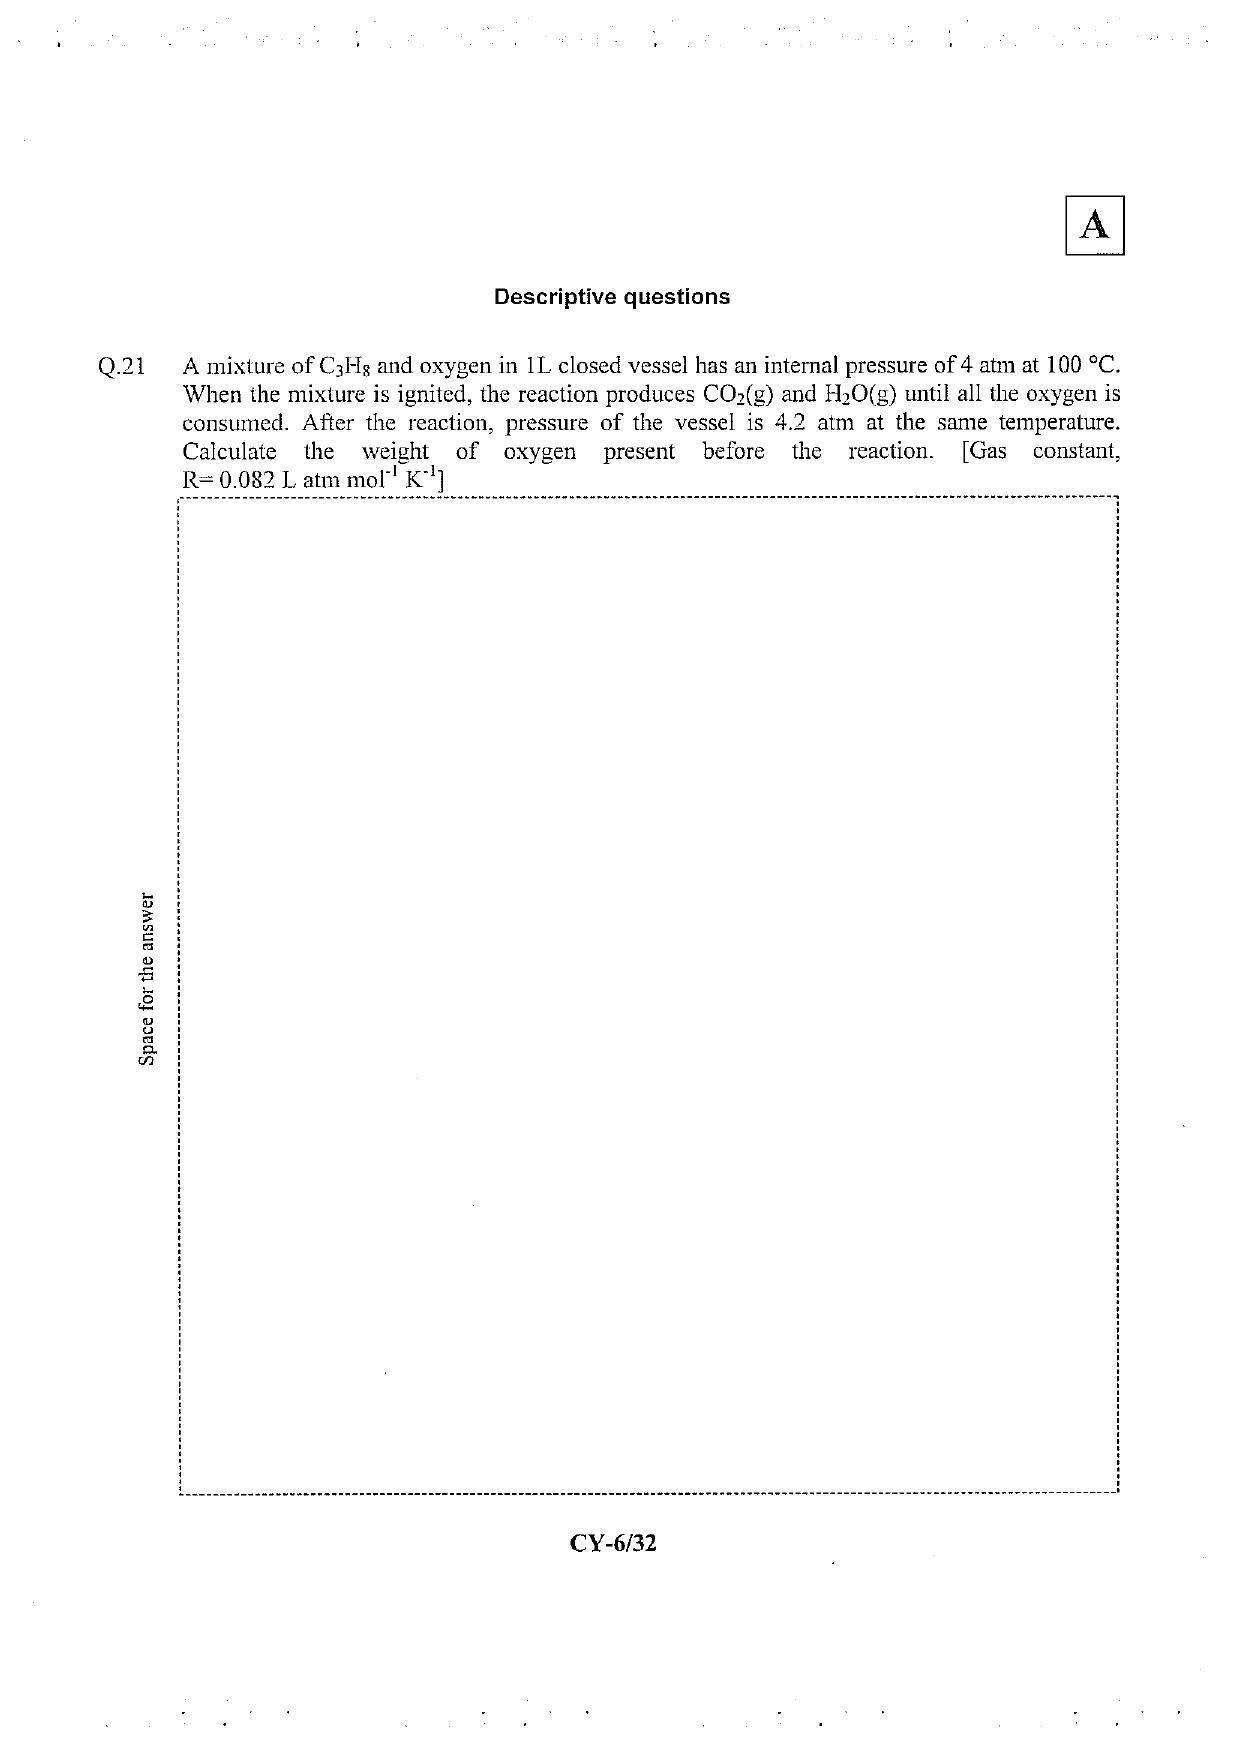 JAM 2013: CY Question Paper - Page 7